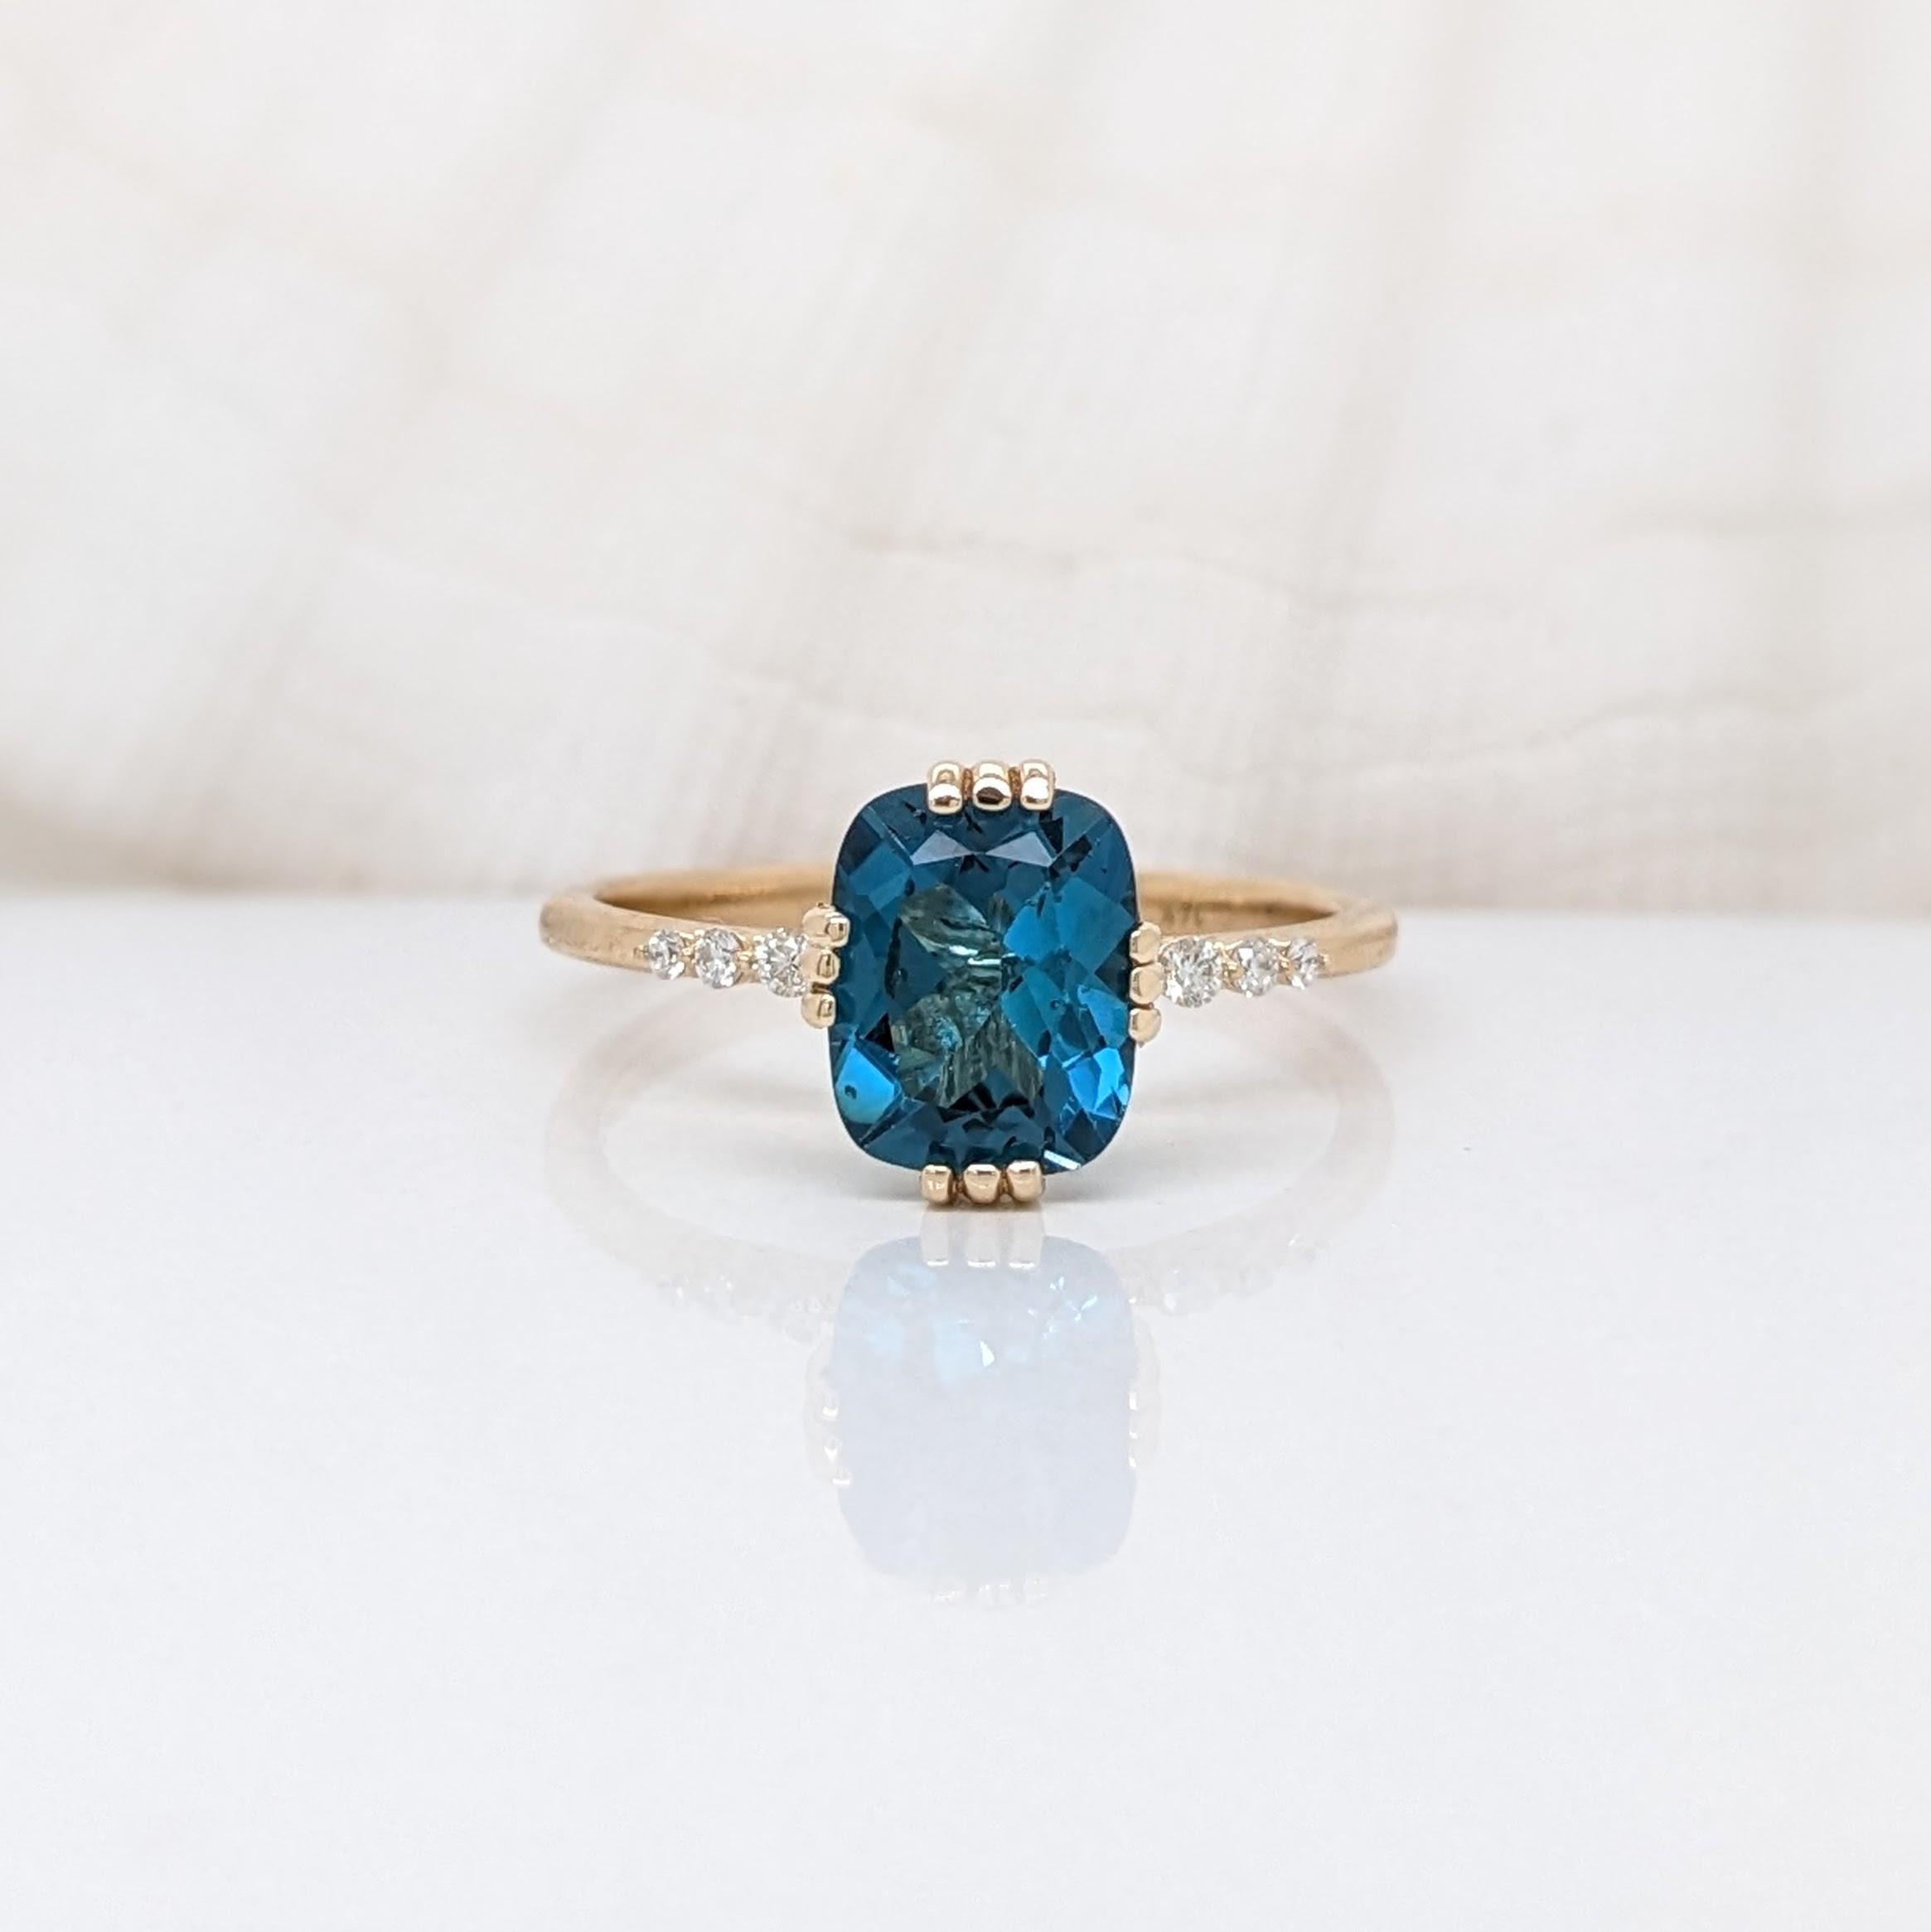 This beautiful ring features a 2.4ct cushion cut London topaz ring in a three prong setting all set in 14k gold. The ring exudes both elegance and durability, making it suitable for everyday wear or special occasions! 


Specifications

Item Type: